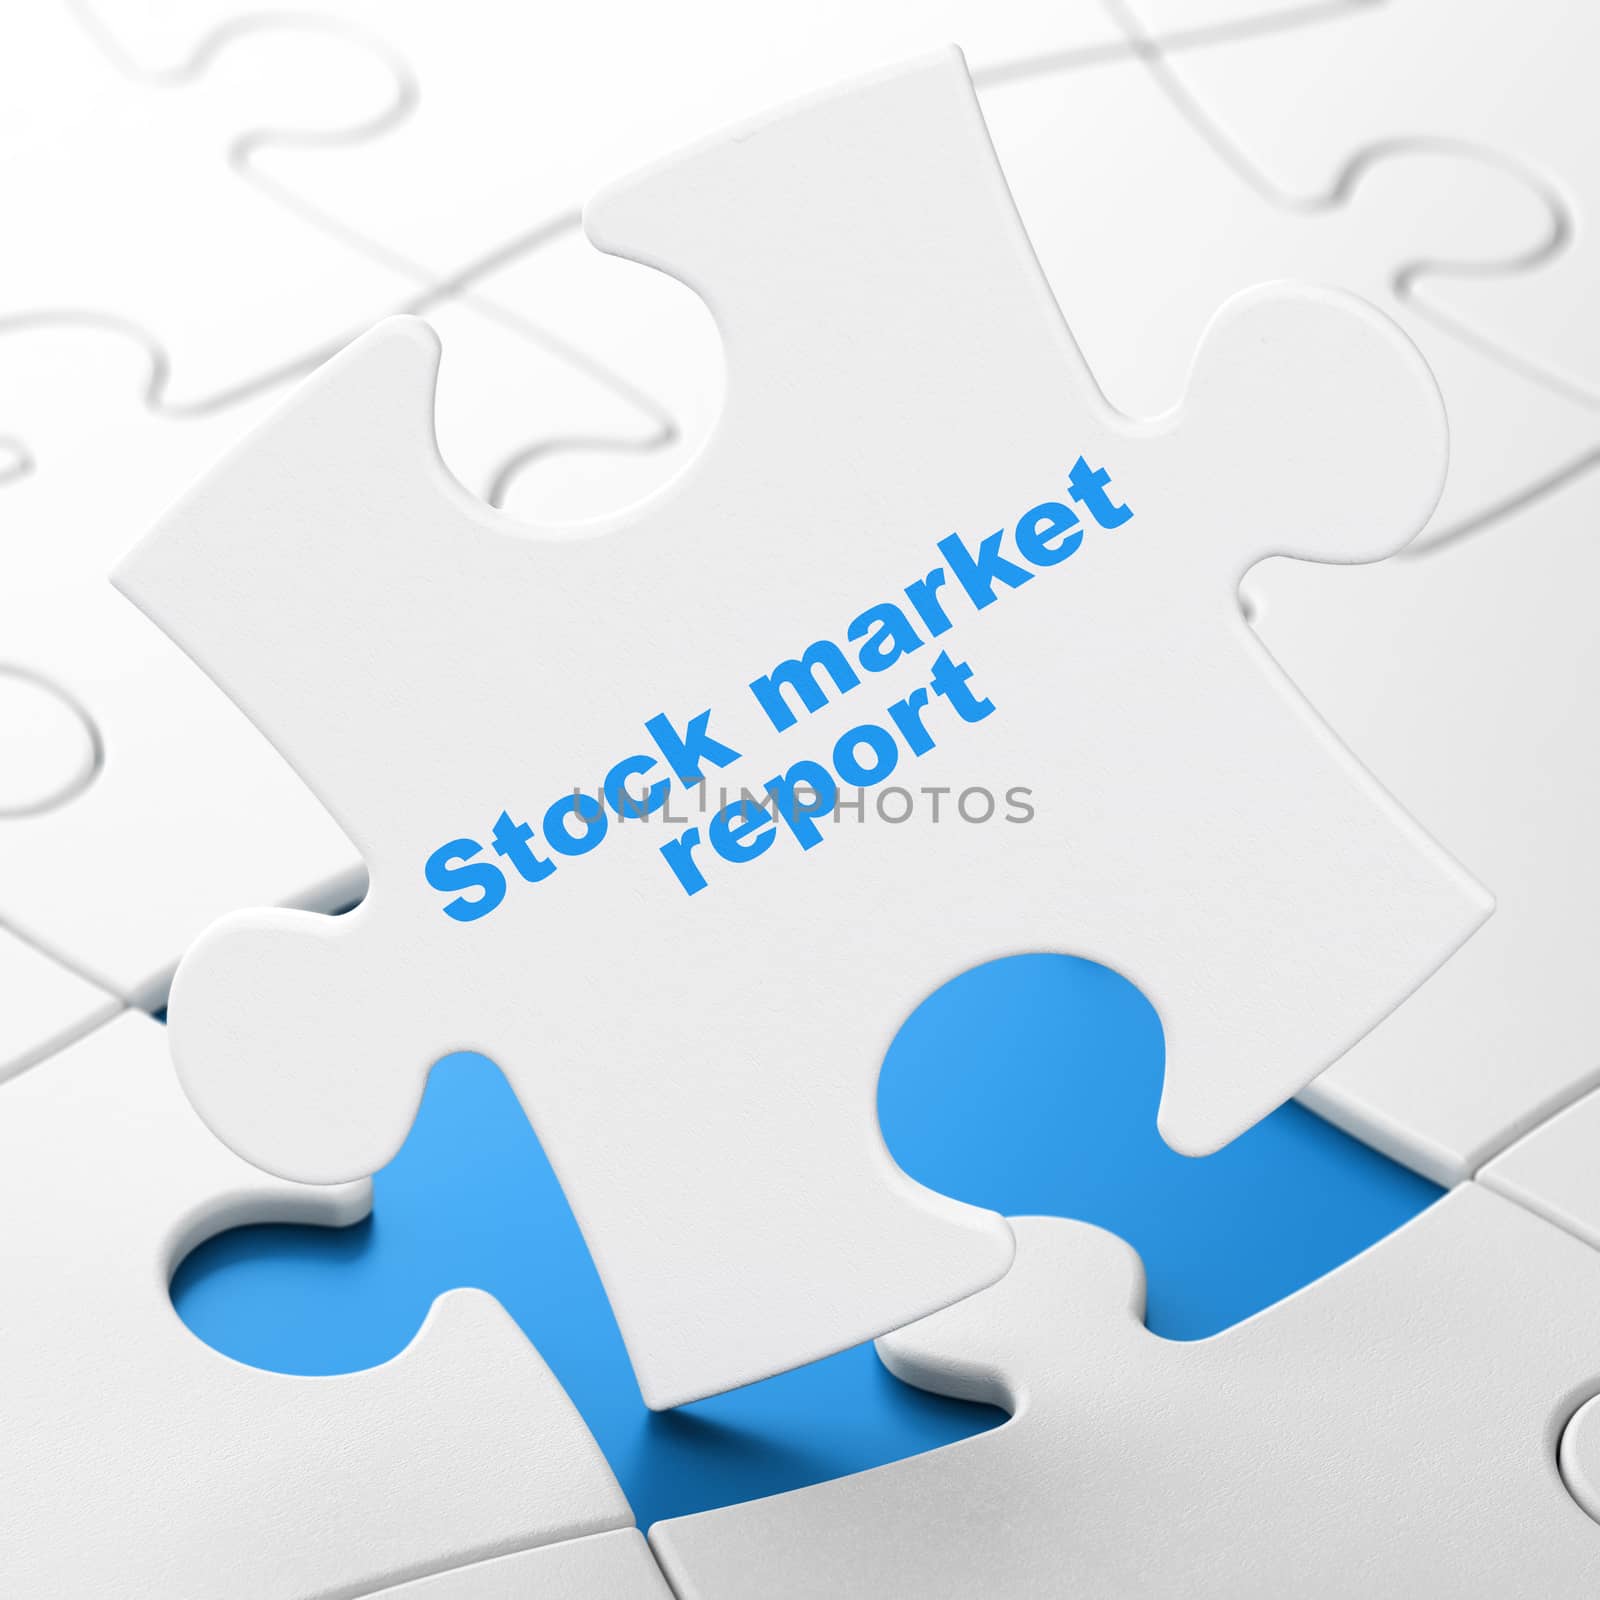 Banking concept: Stock Market Report on puzzle background by maxkabakov